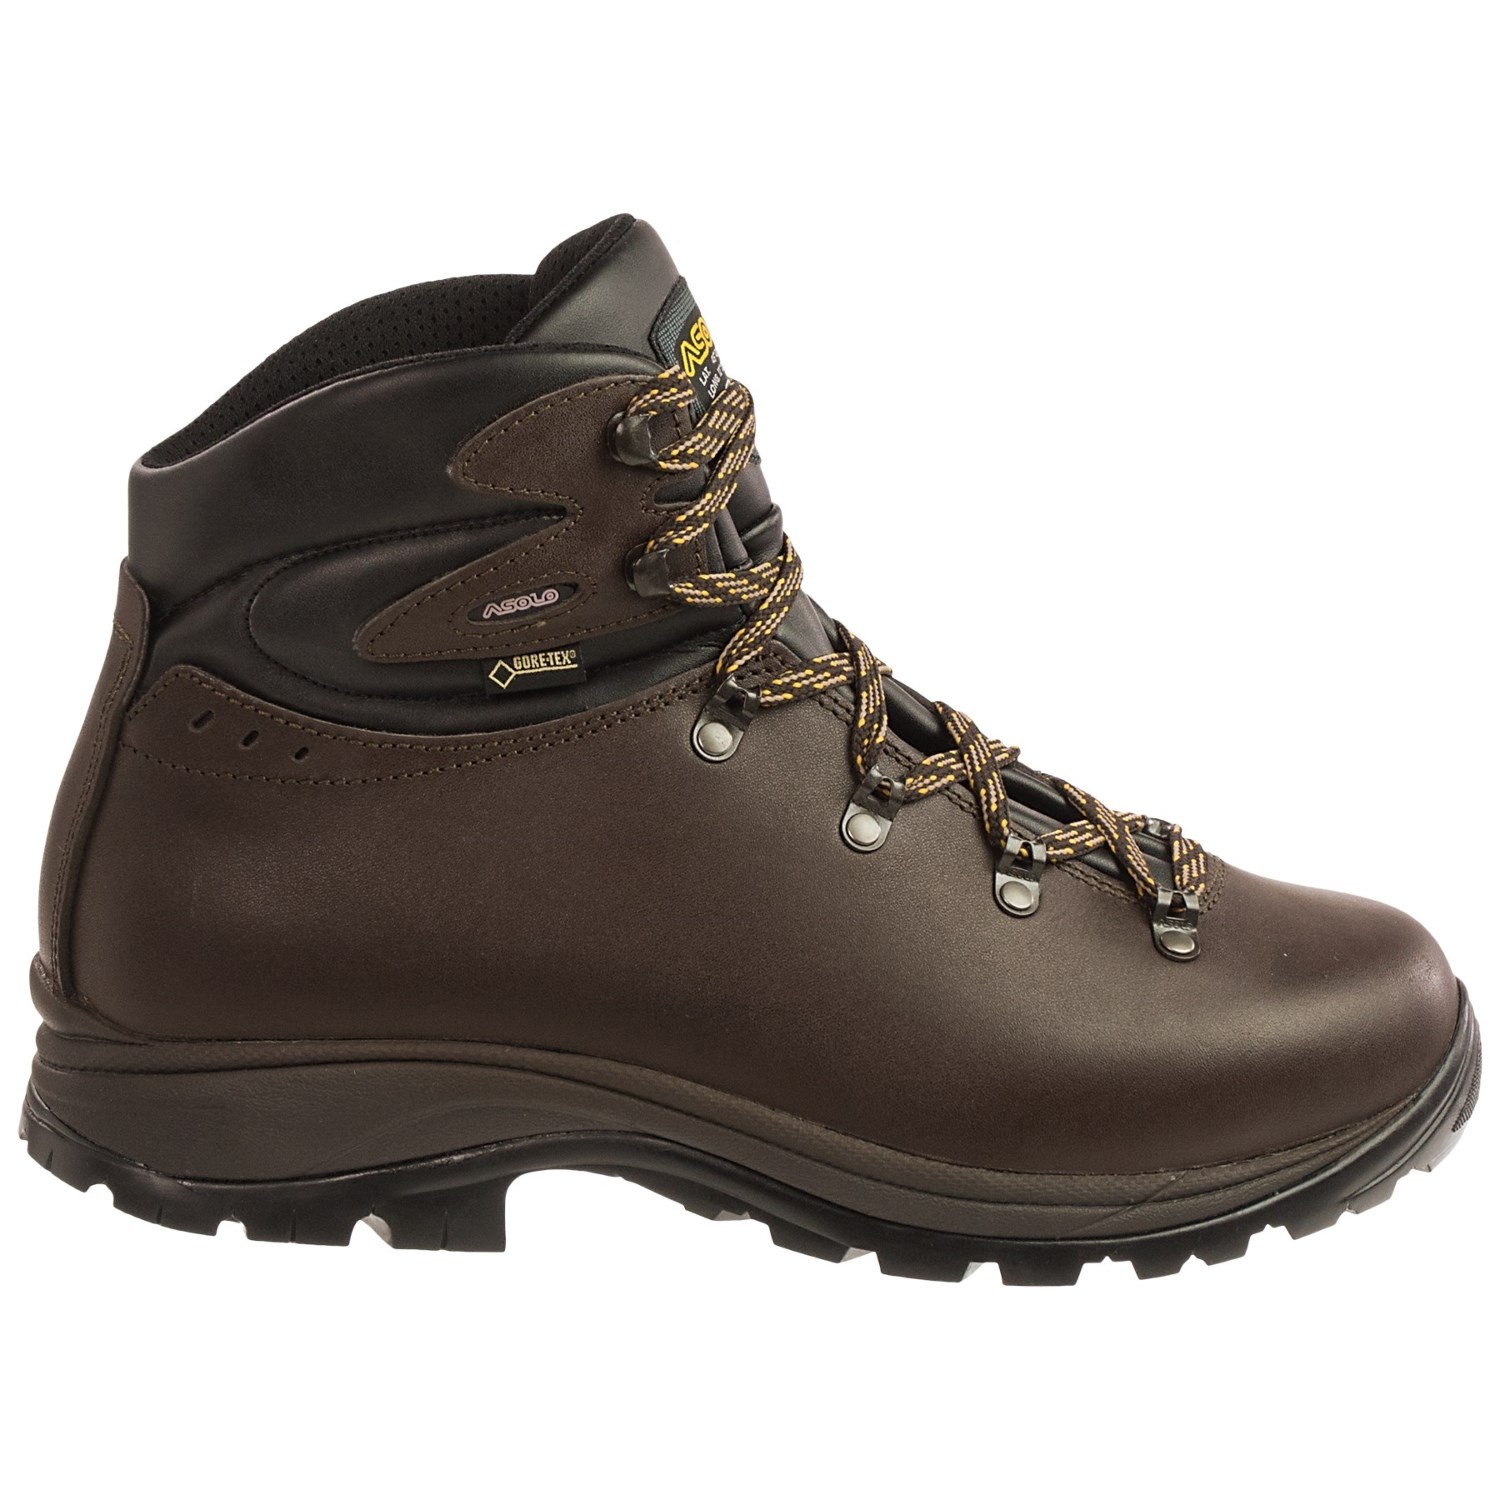 gore tex boots asolo scafell gore-tex® hiking boots - waterproof, leather (for men) UKABMYW